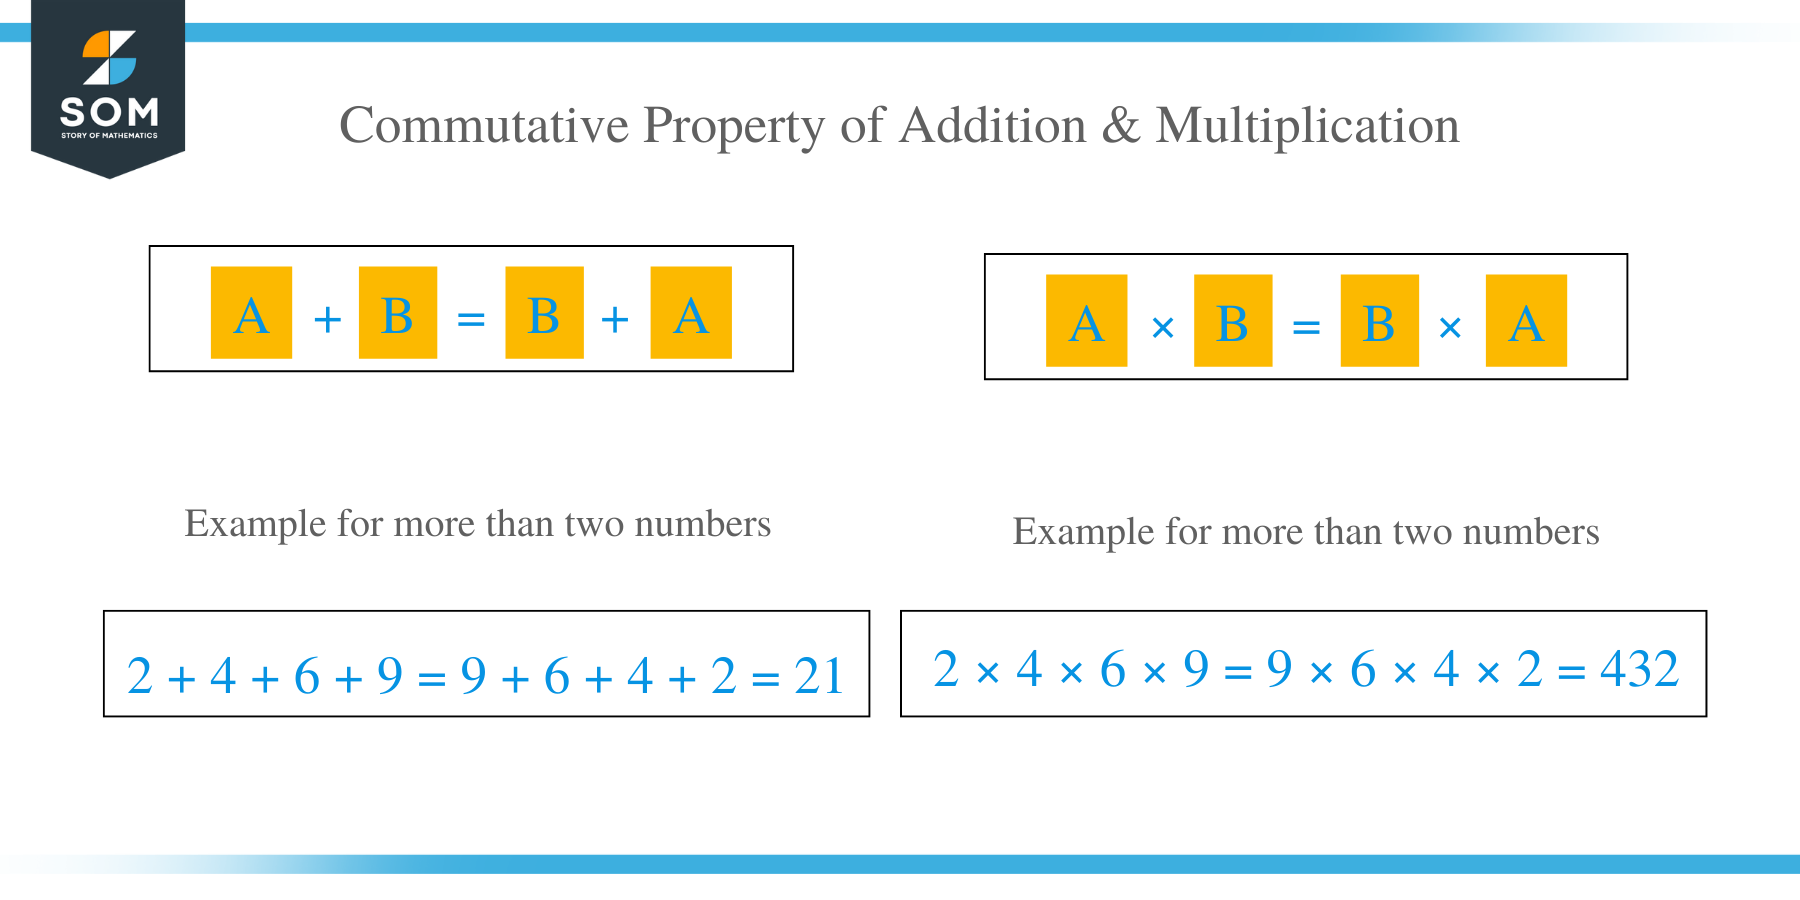 Commutative Property of Addition and Multiplication